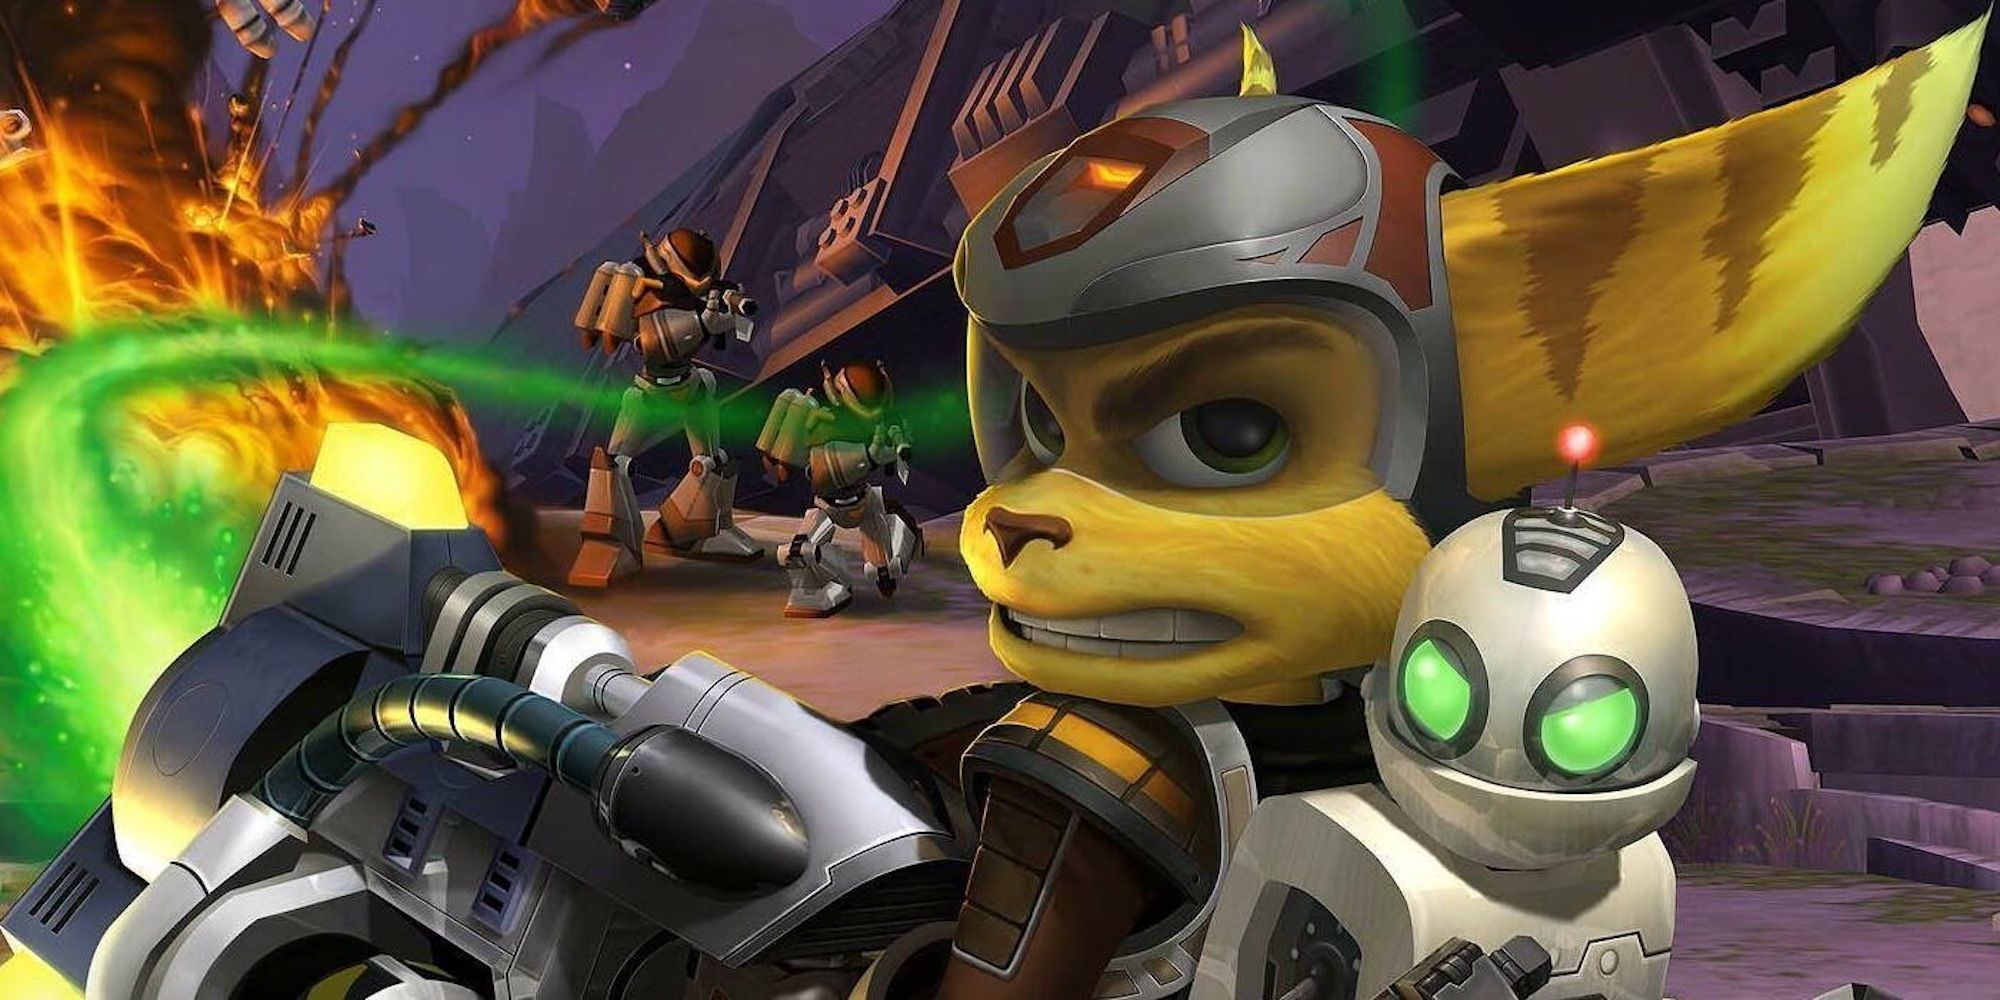 The box art featuring characters from Ratchet and Clank Going Commando